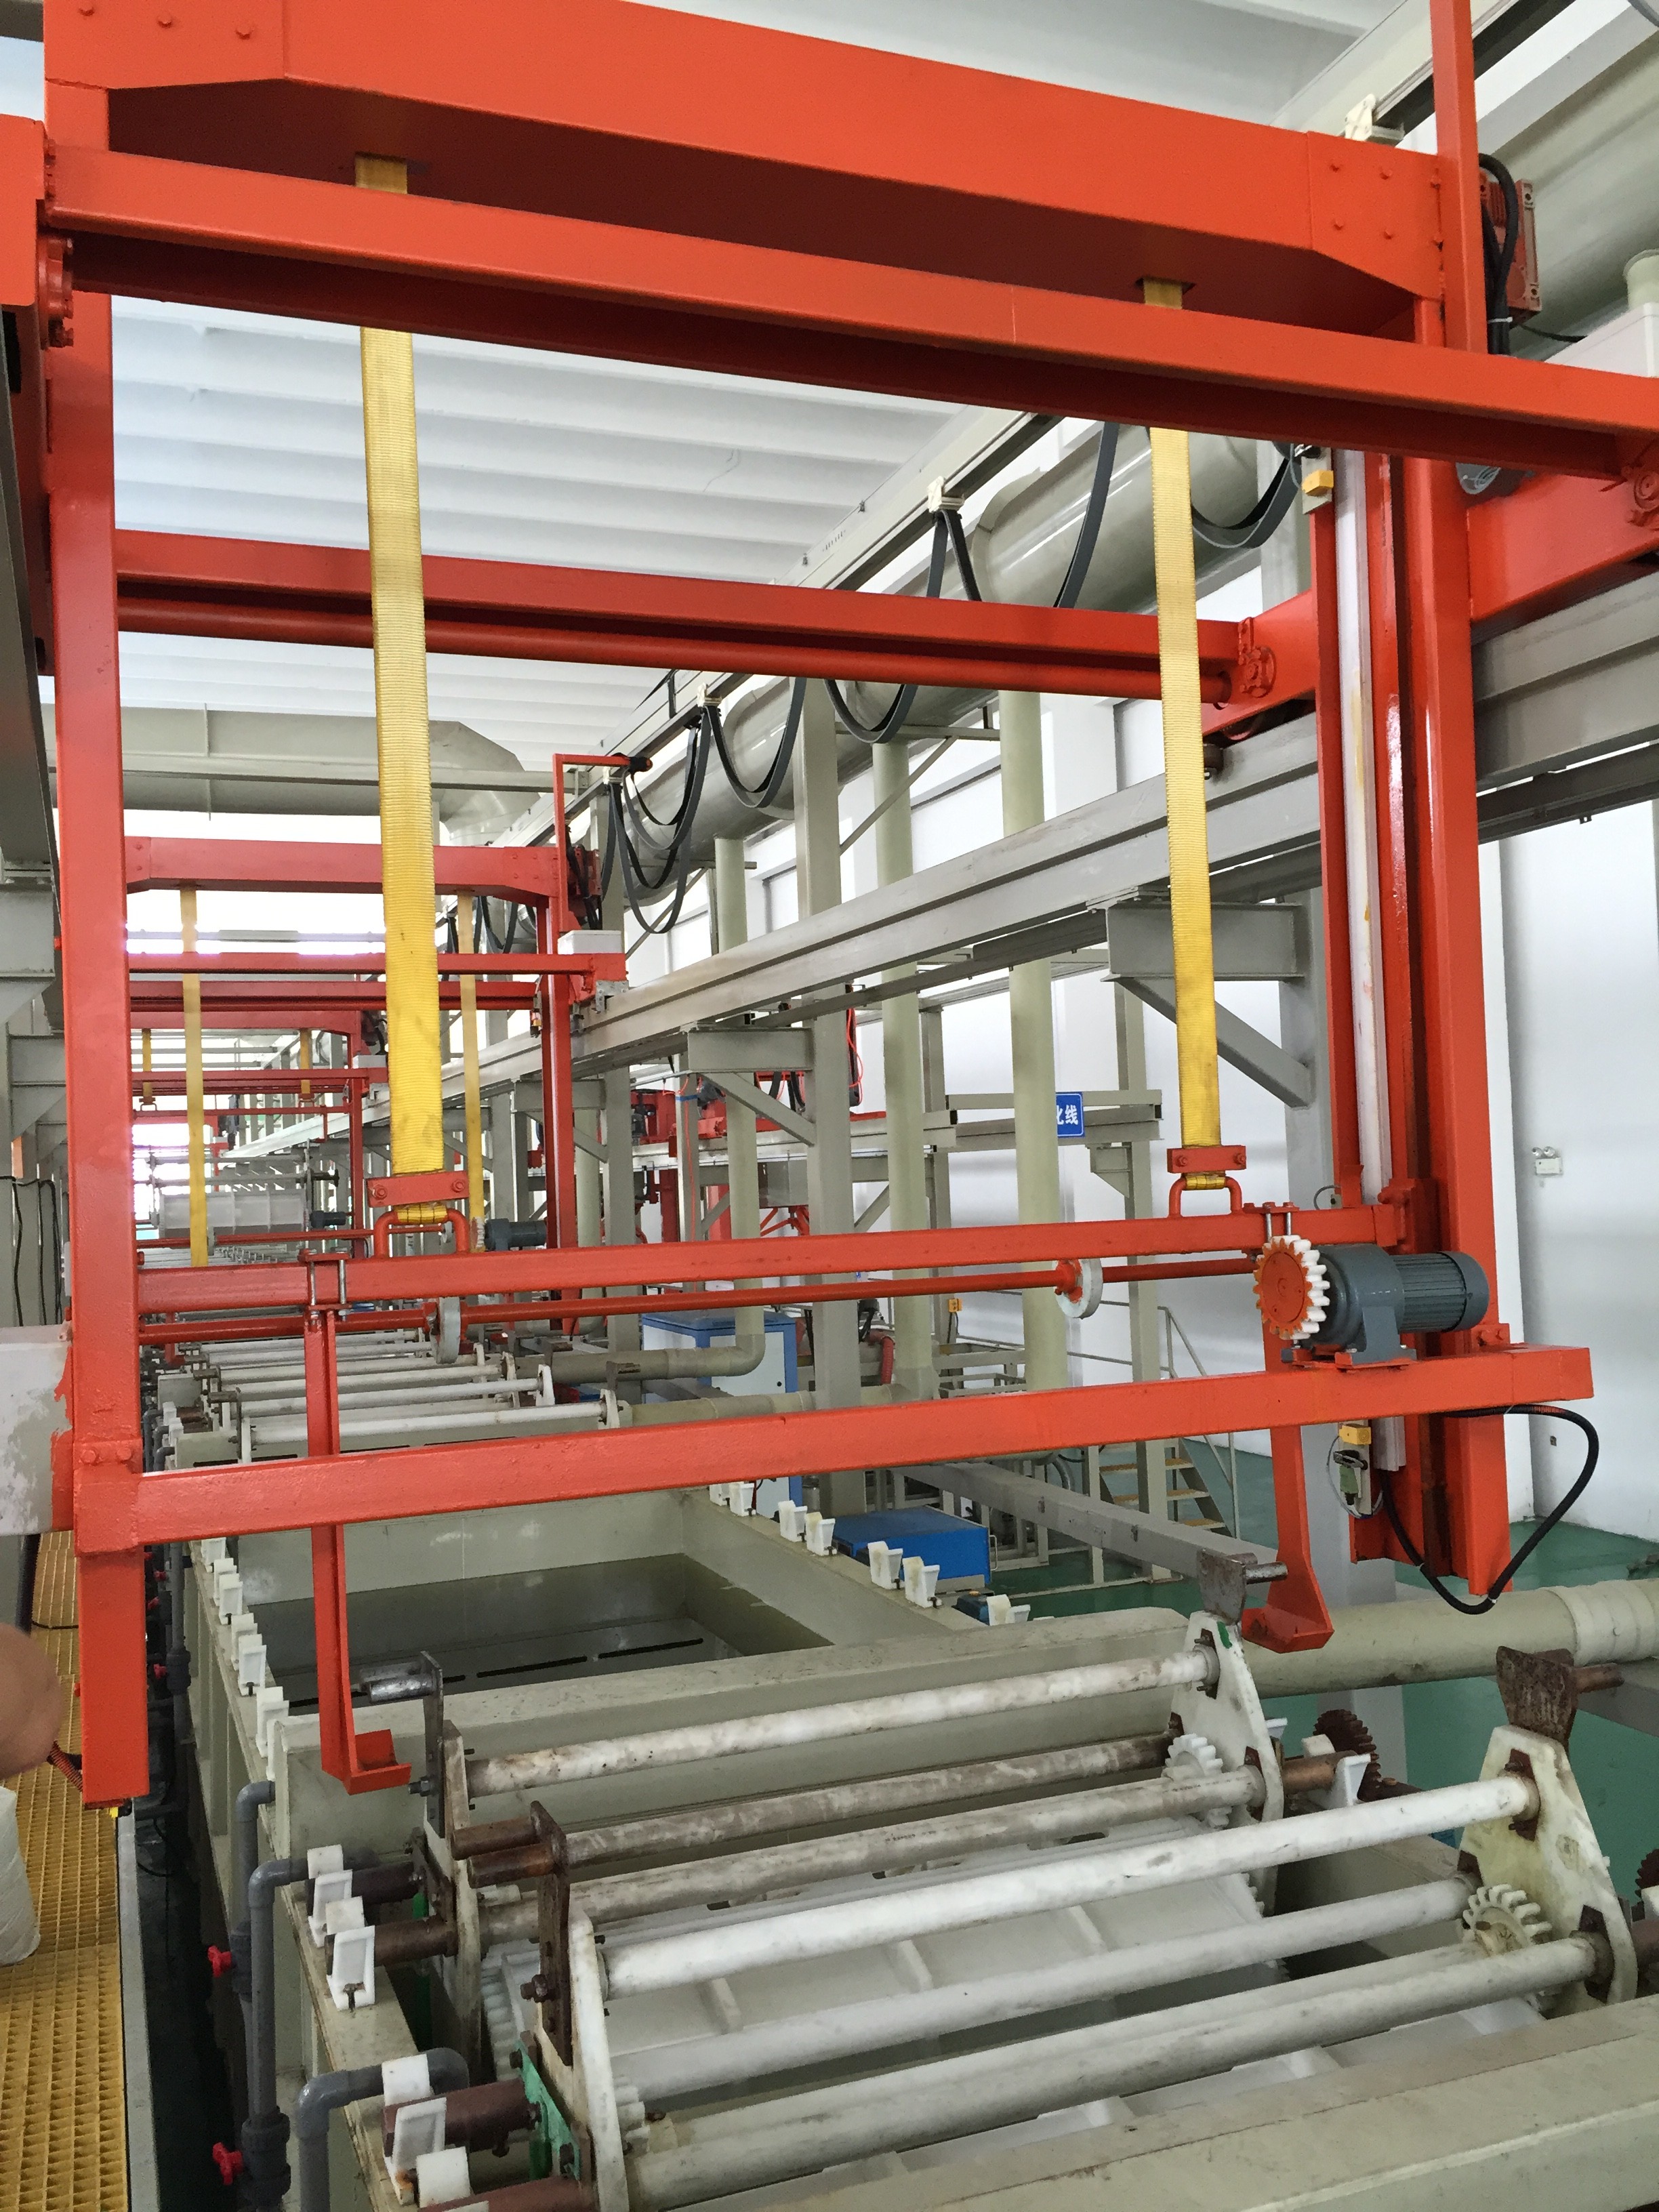 Automatic zinc plating line for fasteners